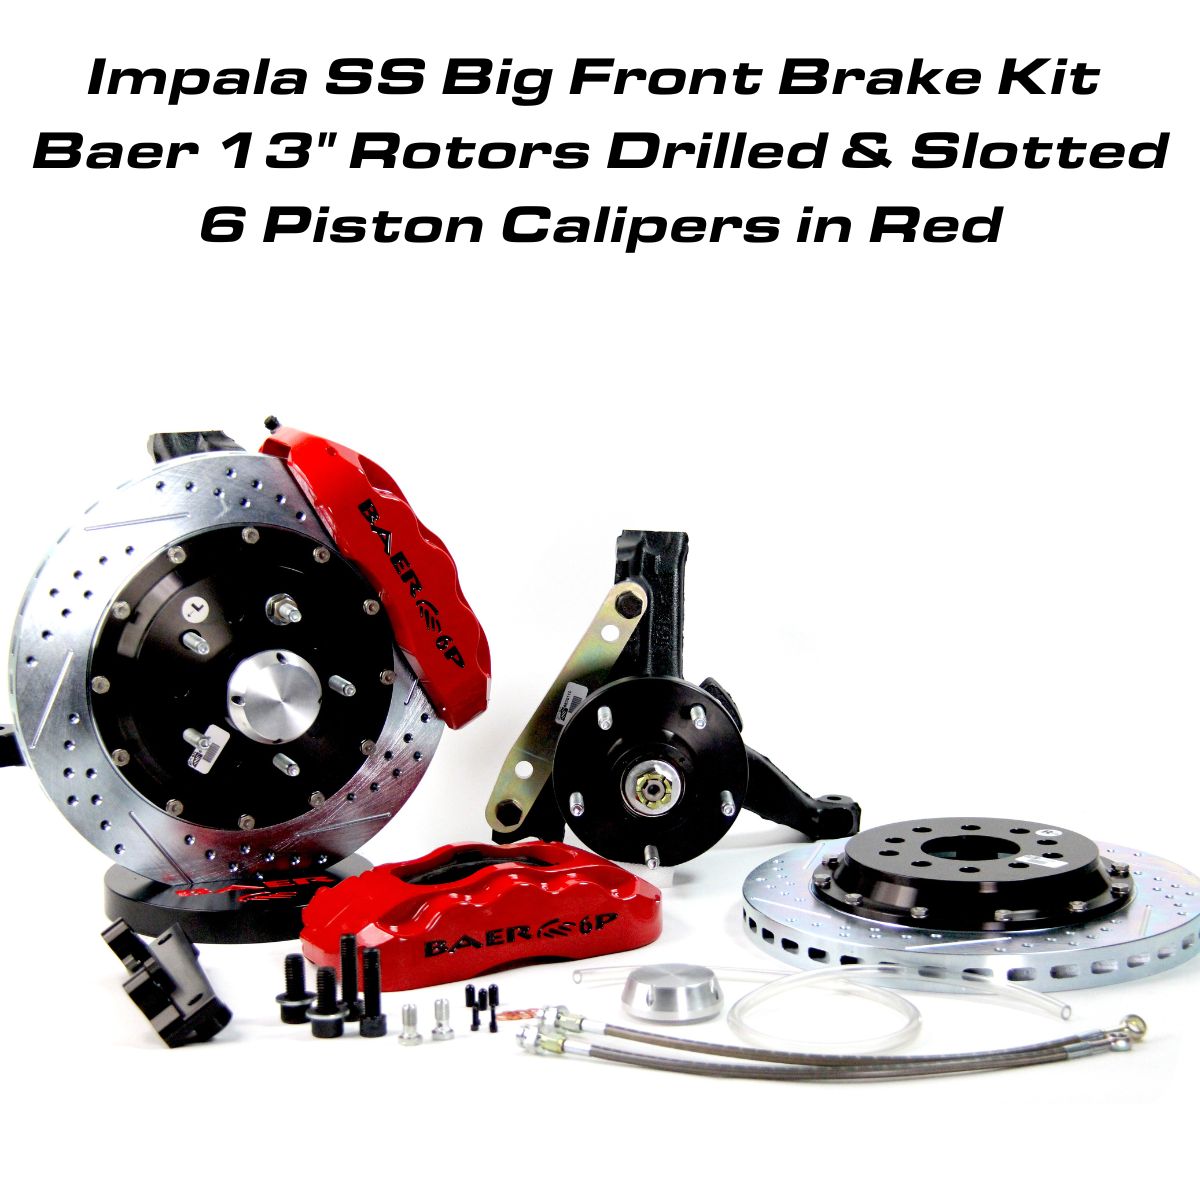 Impala SS Big Front Brake Kit, 13 Inch Baer Rotors, 6 Piston Forged 6P Calipers - Drilled and Slotted, Red Calipers